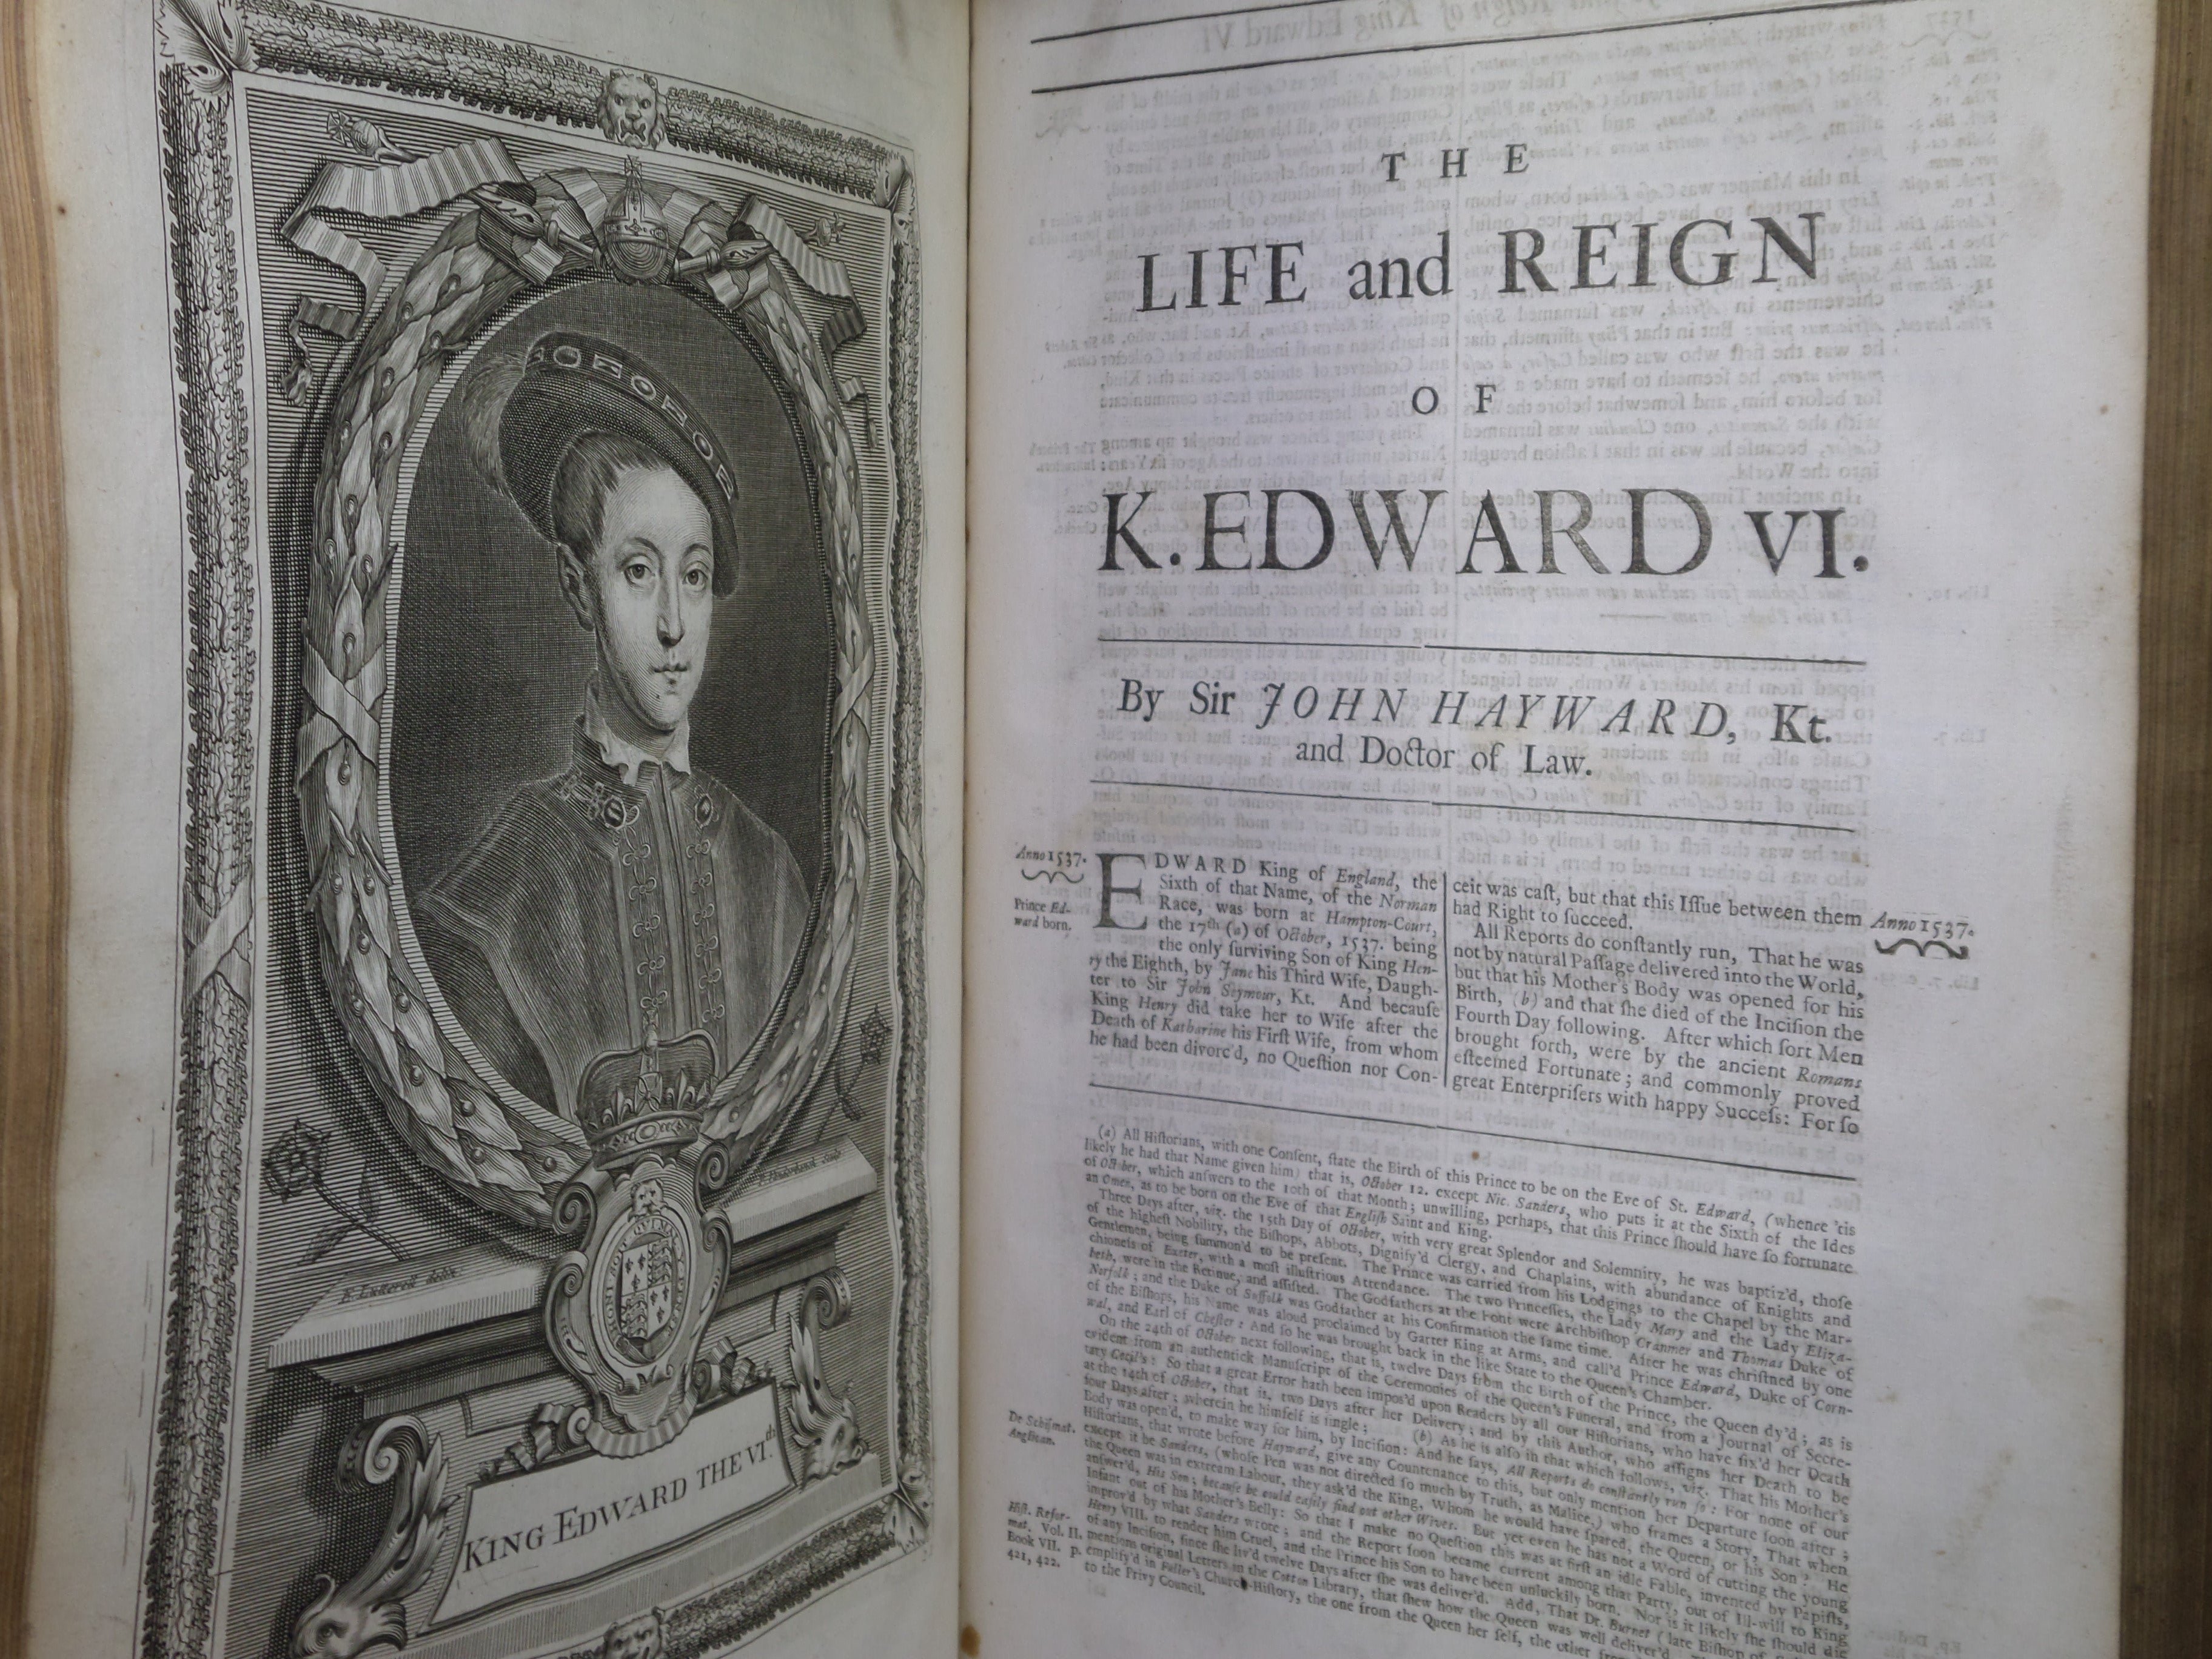 A COMPLETE HISTORY OF ENGLAND: WITH THE LIVES OF ALL THE KINGS AND QUEENS THEREOF BY WHITE KENNETT 1719 SECOND EDITION VOLUME II